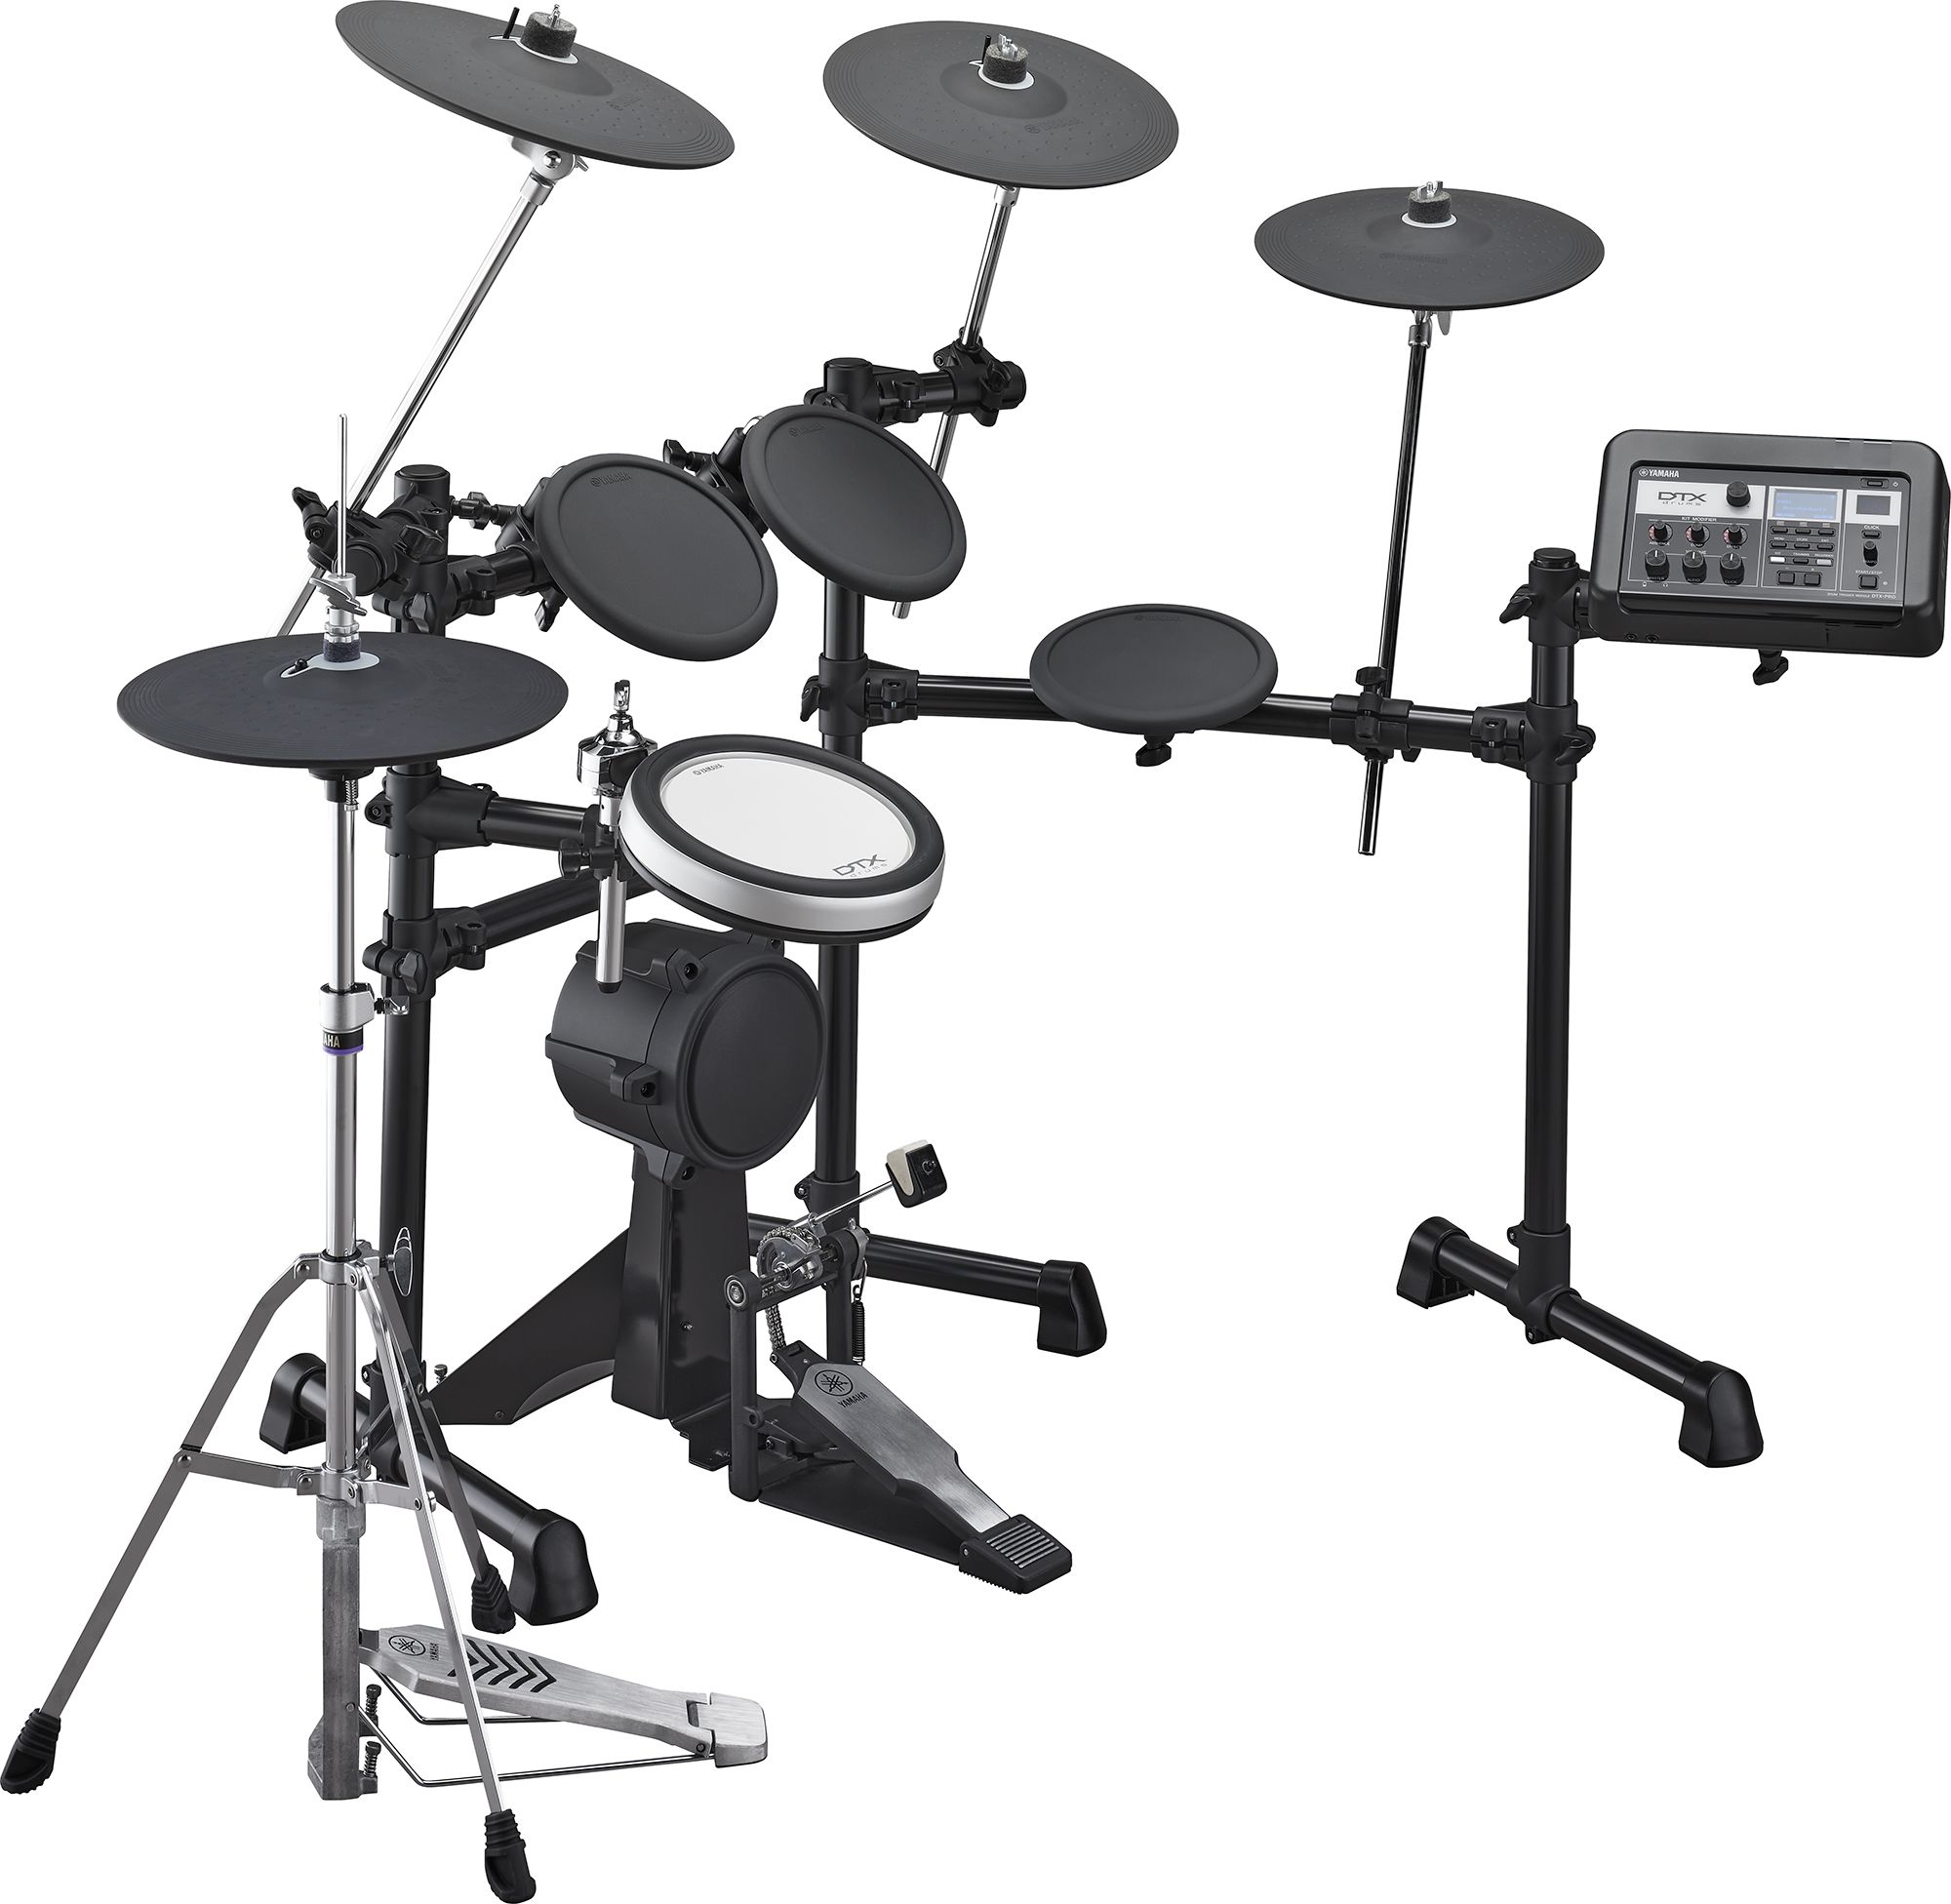 DTX6 Series - Products - Electronic Drum Kits - Electronic Drums 